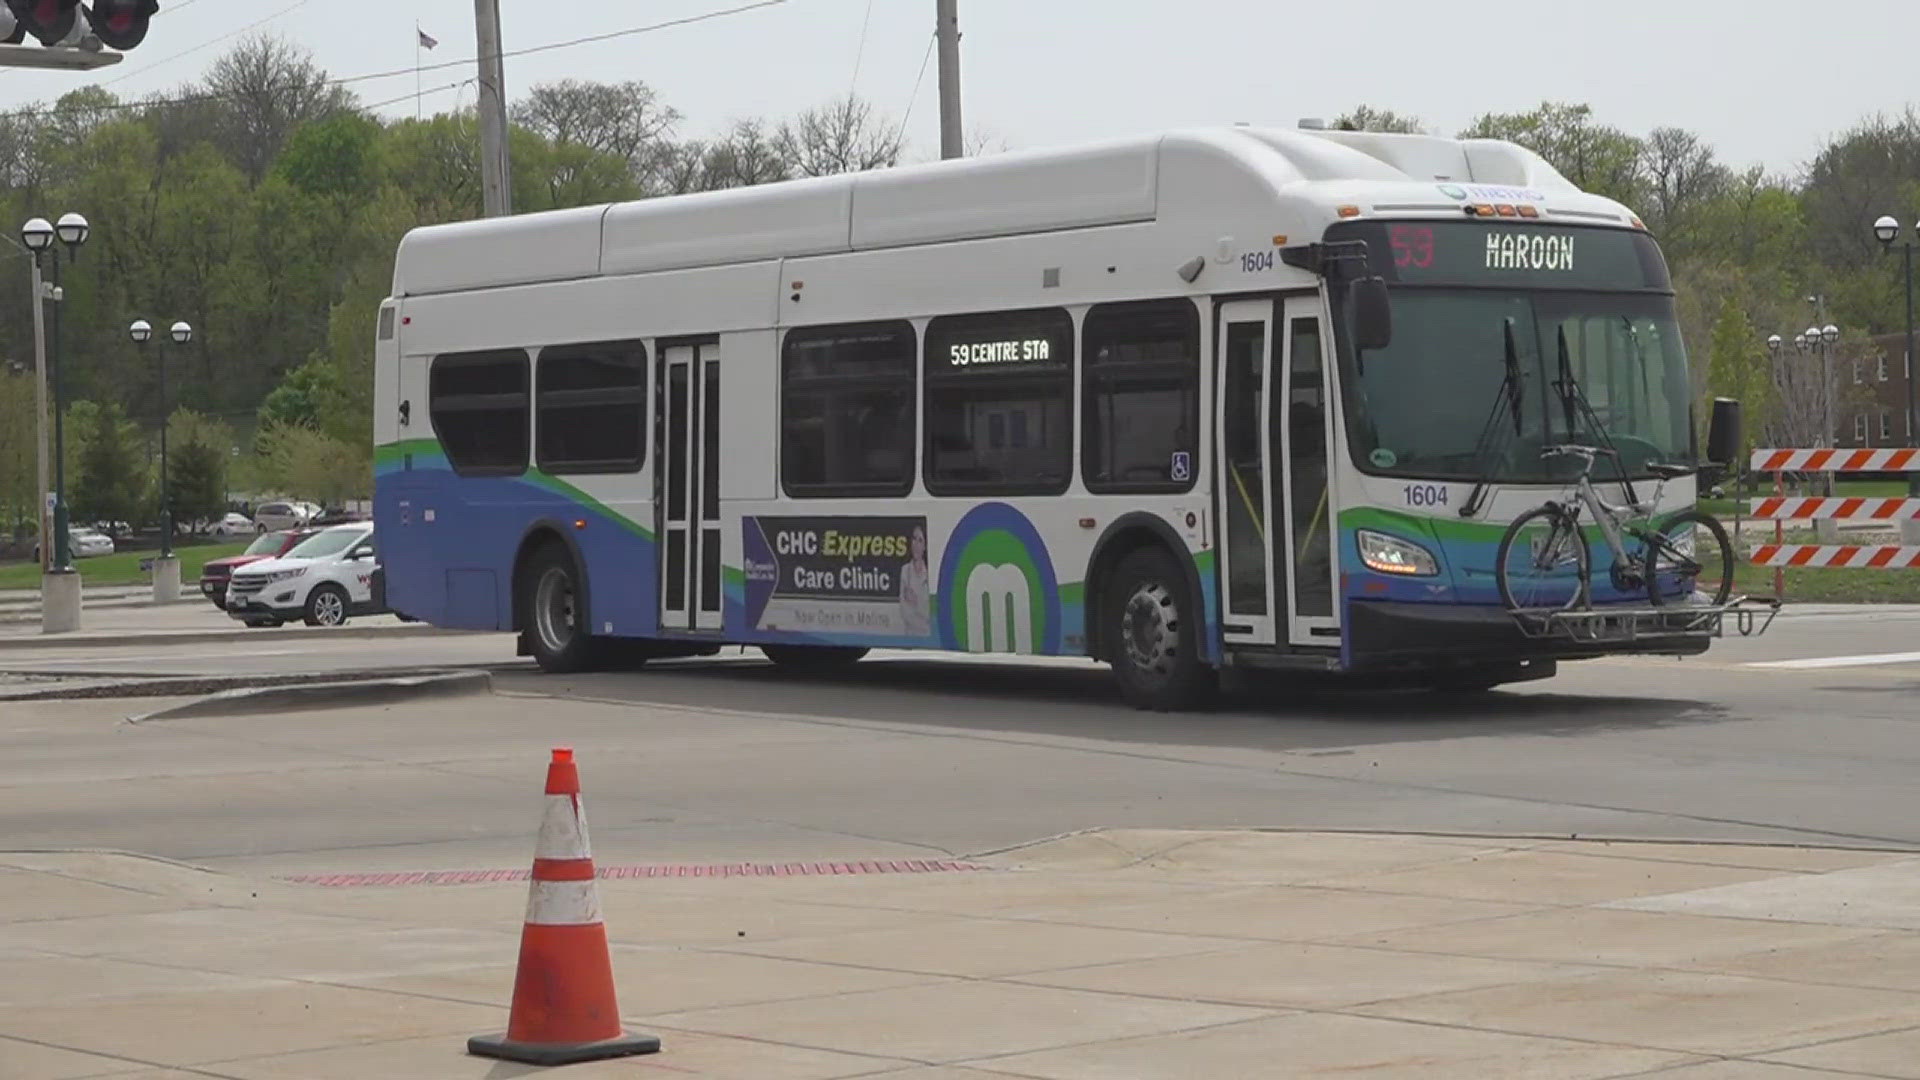 Leaders in local transportation services are looking at how to make it easier for you to get around town.